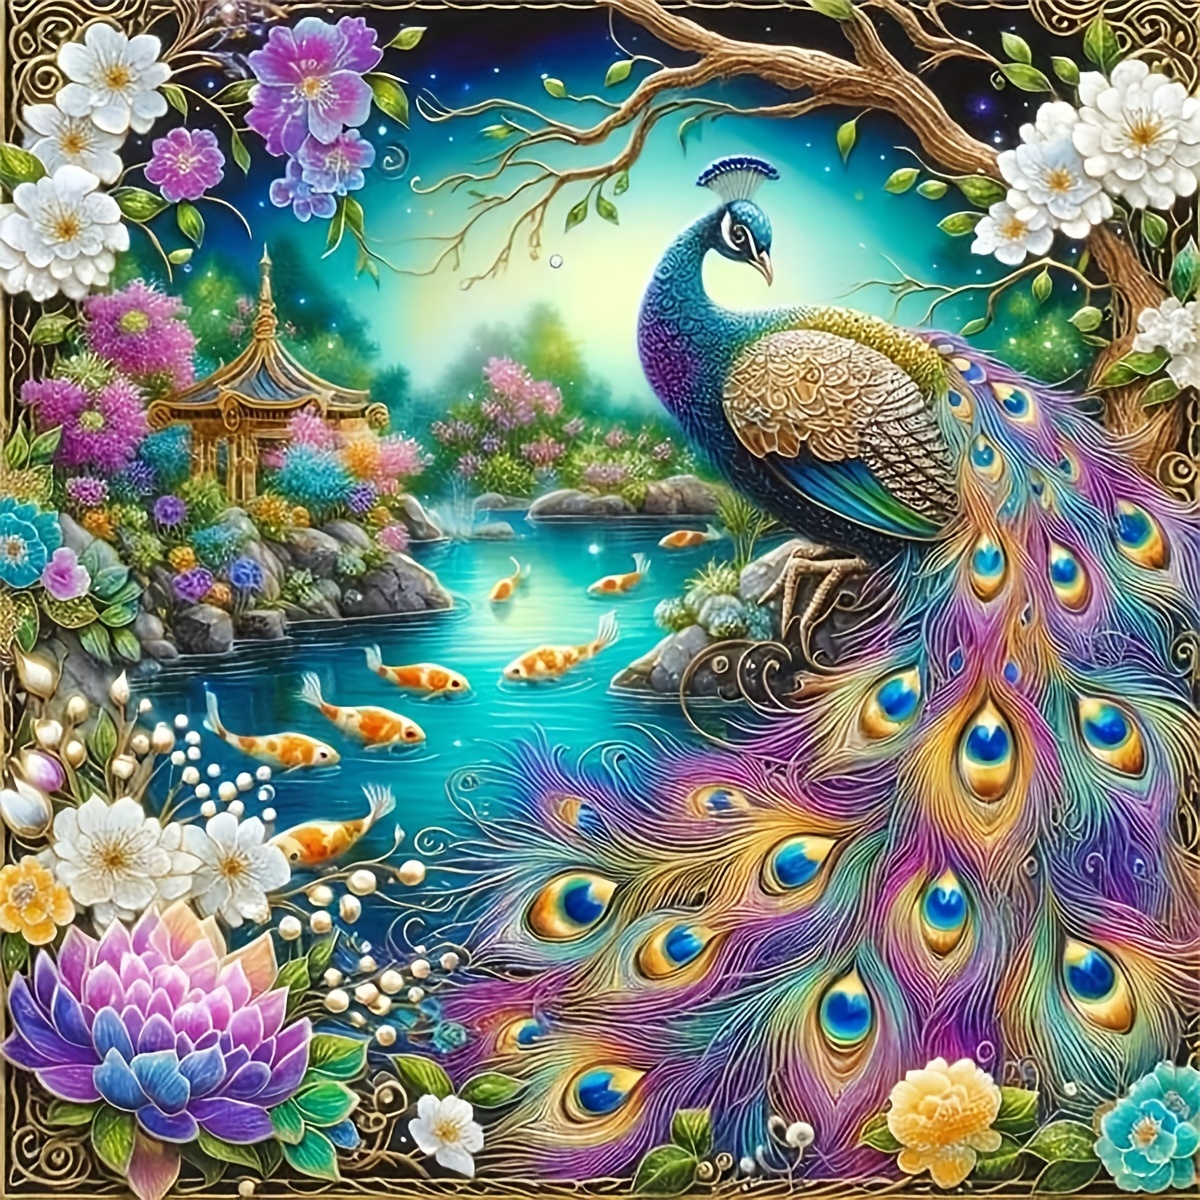 

Peacock 5d Diamond Painting Kit - Diy Full Drill Round Diamond Art, Embroidery Cross Stitch Craft For Home Wall Decor, Frameless 11.8x11.8in